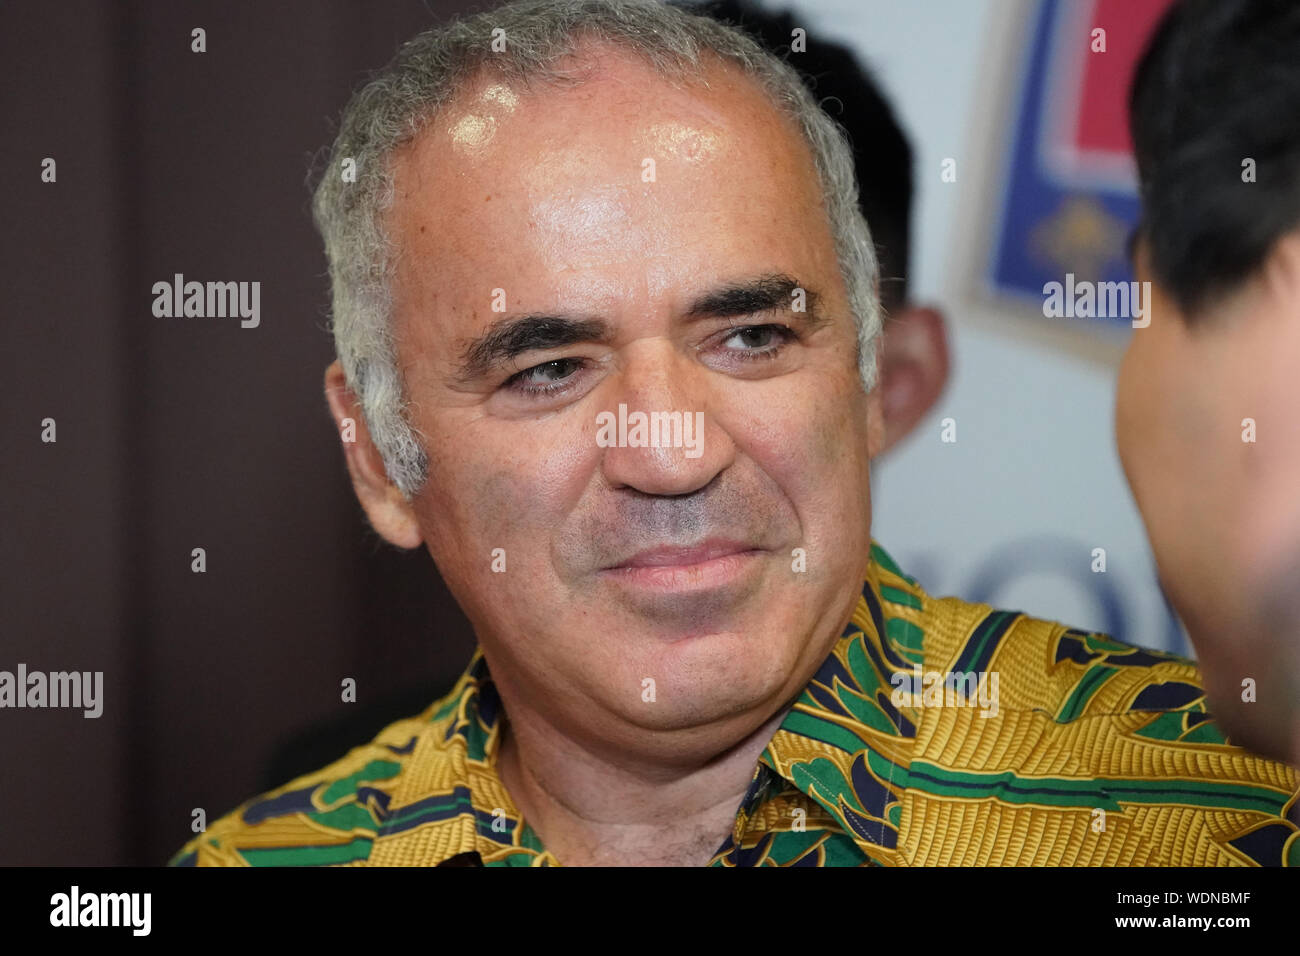 St. Louis, United States. 29th Aug, 2019. Chess Grand Master, Garry Kasparov watches the first game of exhibition team play for those that participated in the Sinquefield Cup Tournament at the Saint Louis Chess Club in St. Louis on Thursday, August 29, 2019. Kasparov, the former world chess champion, is considered to be the greatest chess player of all time. Photo by Bill Greenblatt/UPI Credit: UPI/Alamy Live News Stock Photo